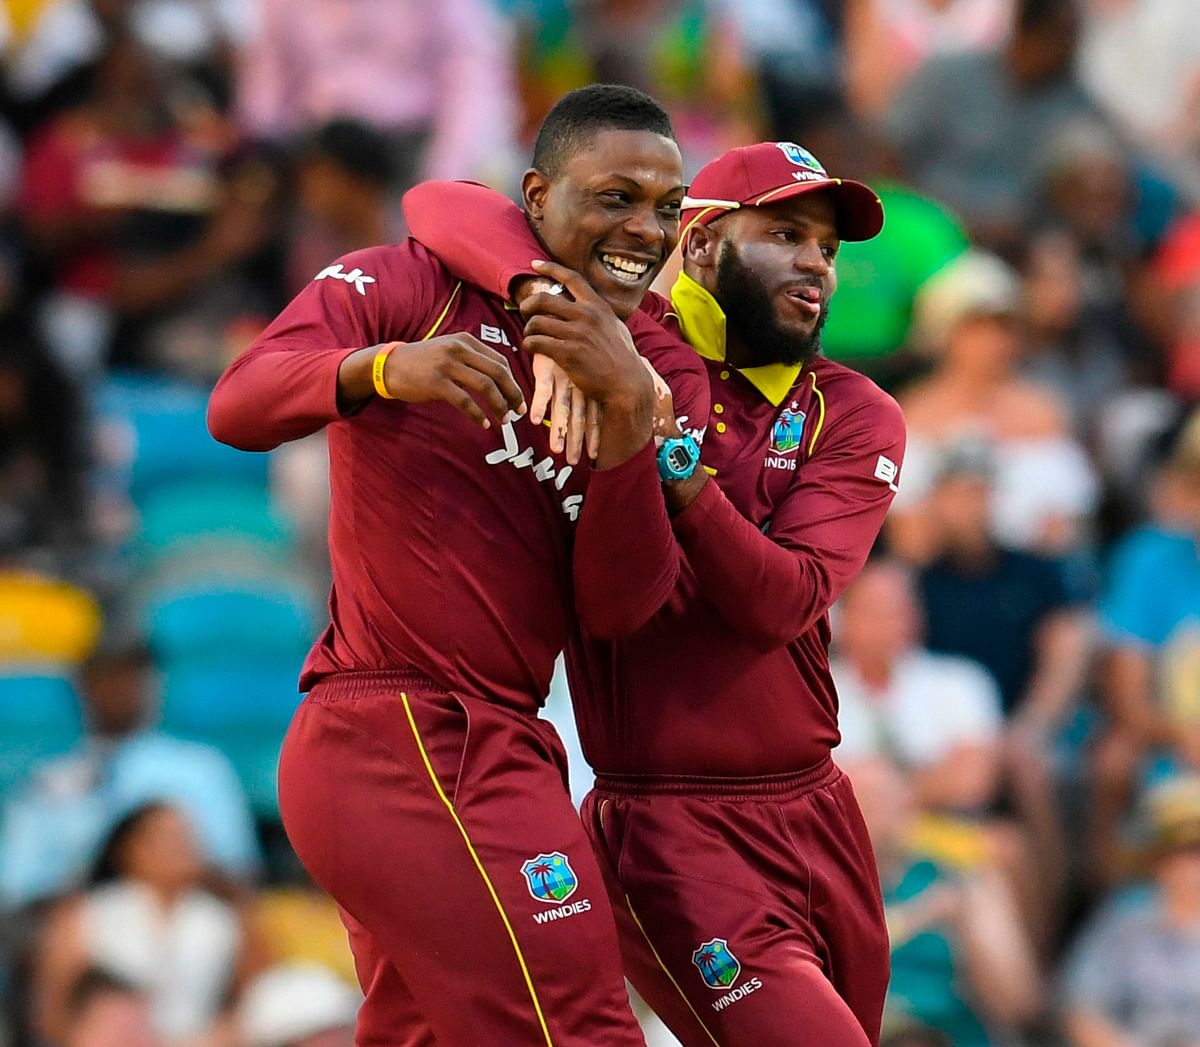 Sheldon Cottrell (L) and John Campbell (R) of West Indies celebrate the dismissal of Eoin Morgan of England during the second ODI between West Indies and England at Kensington Oval, Bridgetown, Barbados, on 22 February 2019. Photo: AFP